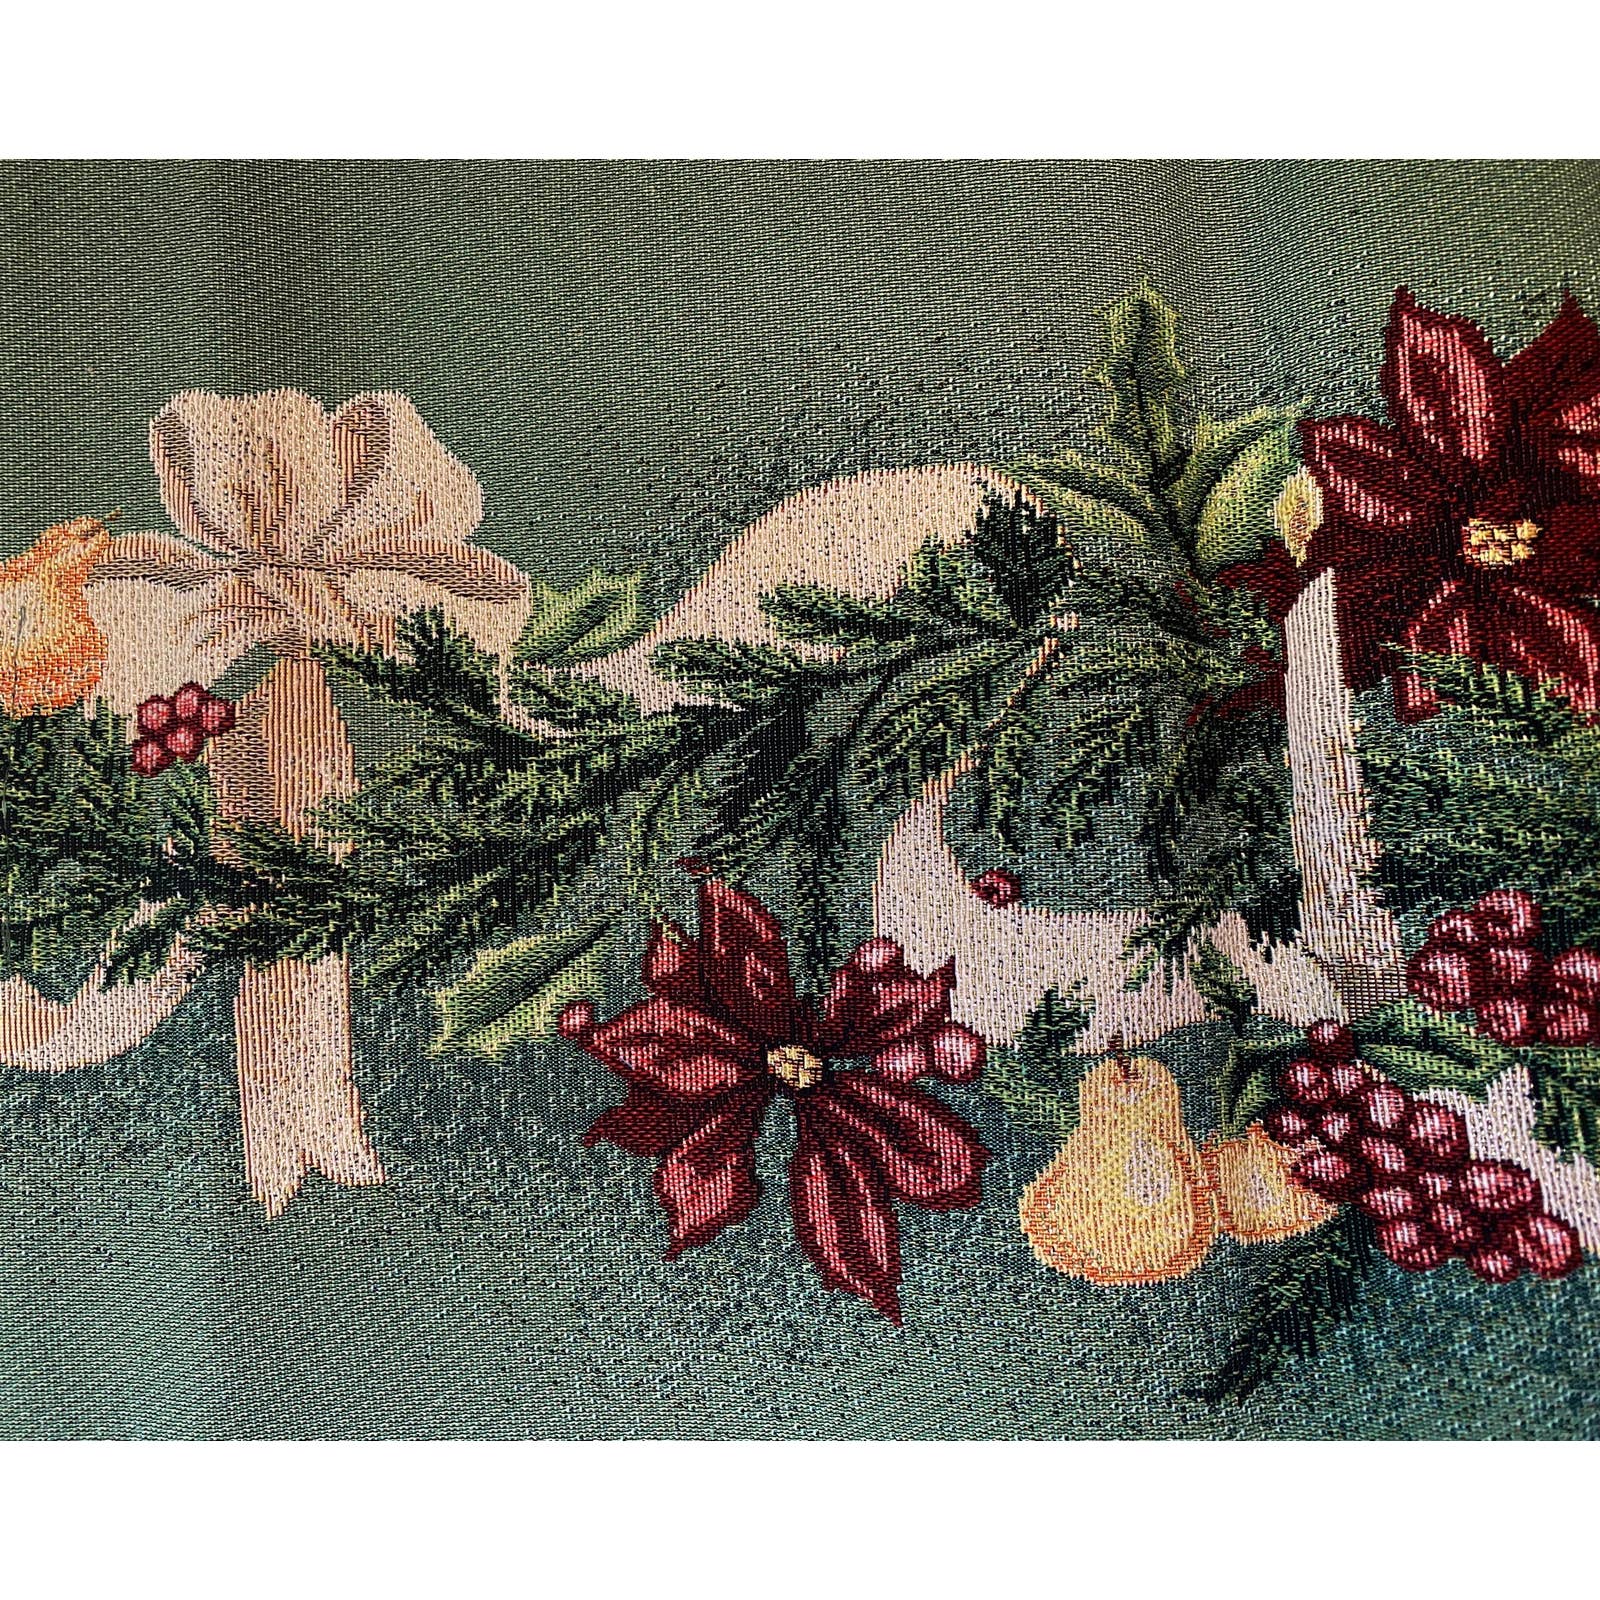 Christmas Poinsettia Table Runner Woven Tapestry Candles Bow Garland Decor NEW